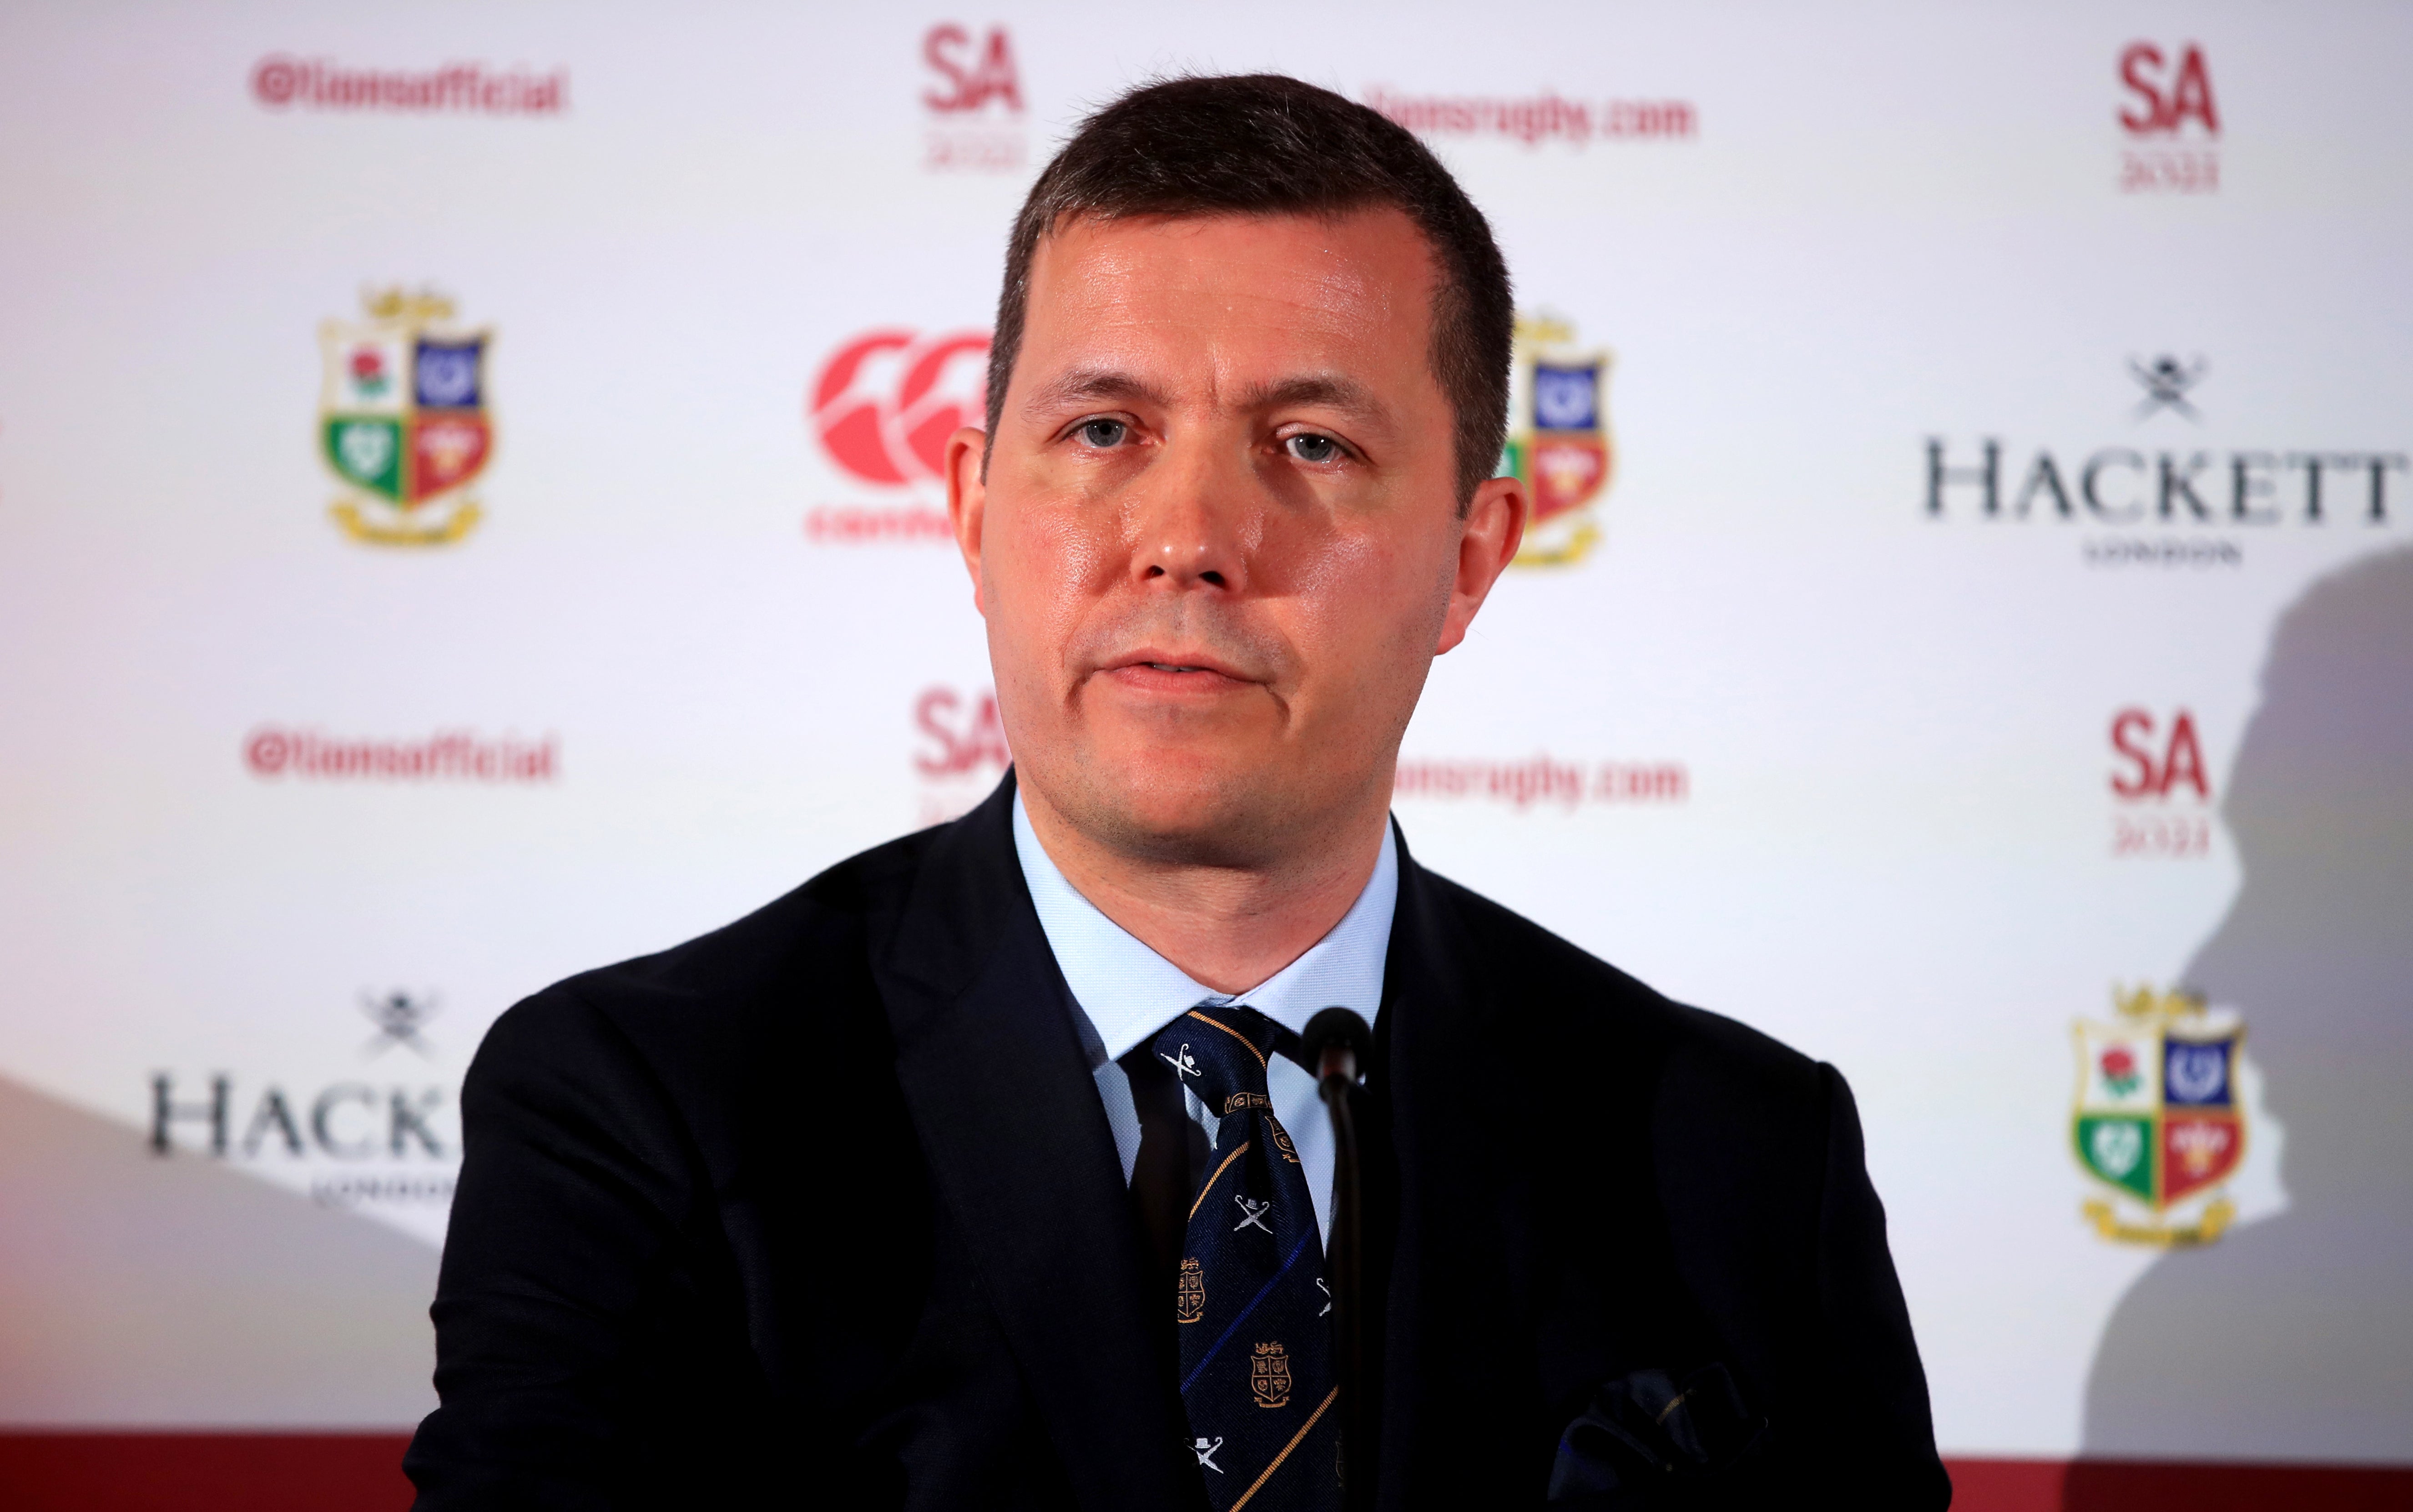 British and Irish Lions managing director Ben Calveley has provided an update on the tour